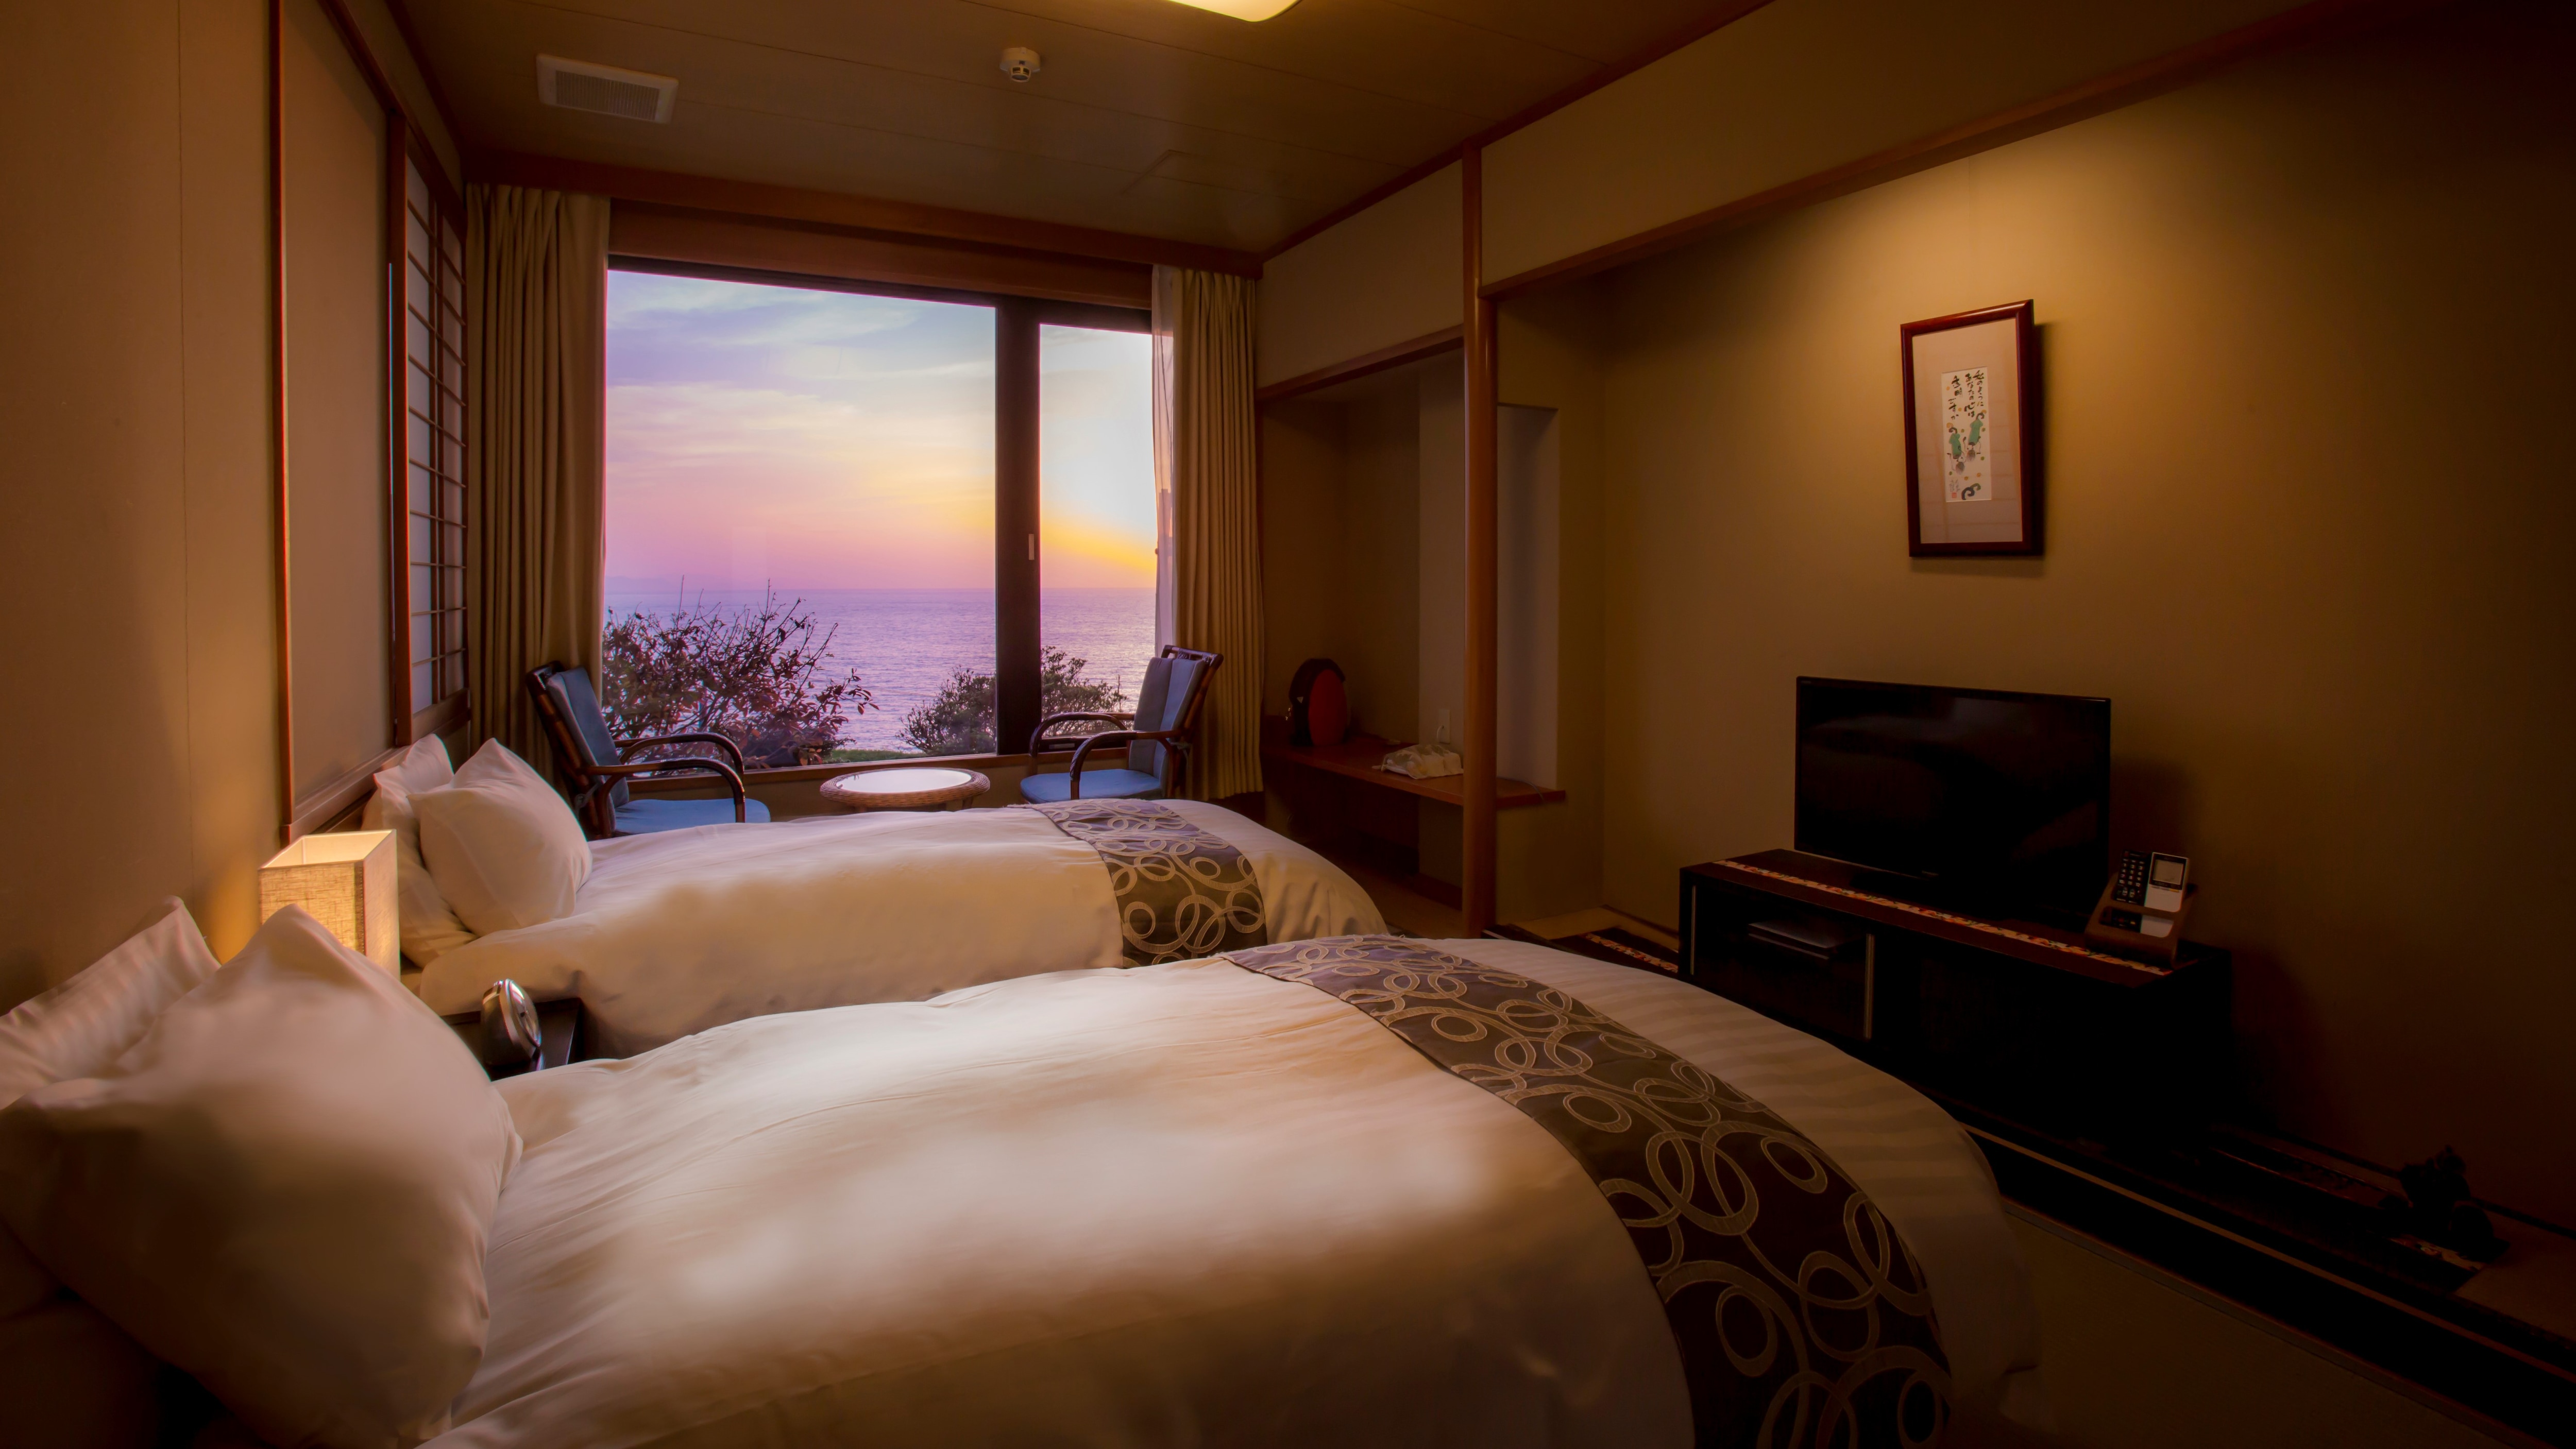 [1st floor: Shiotei] A Japanese-Western style room with twin beds and a relaxing view of the evening view.